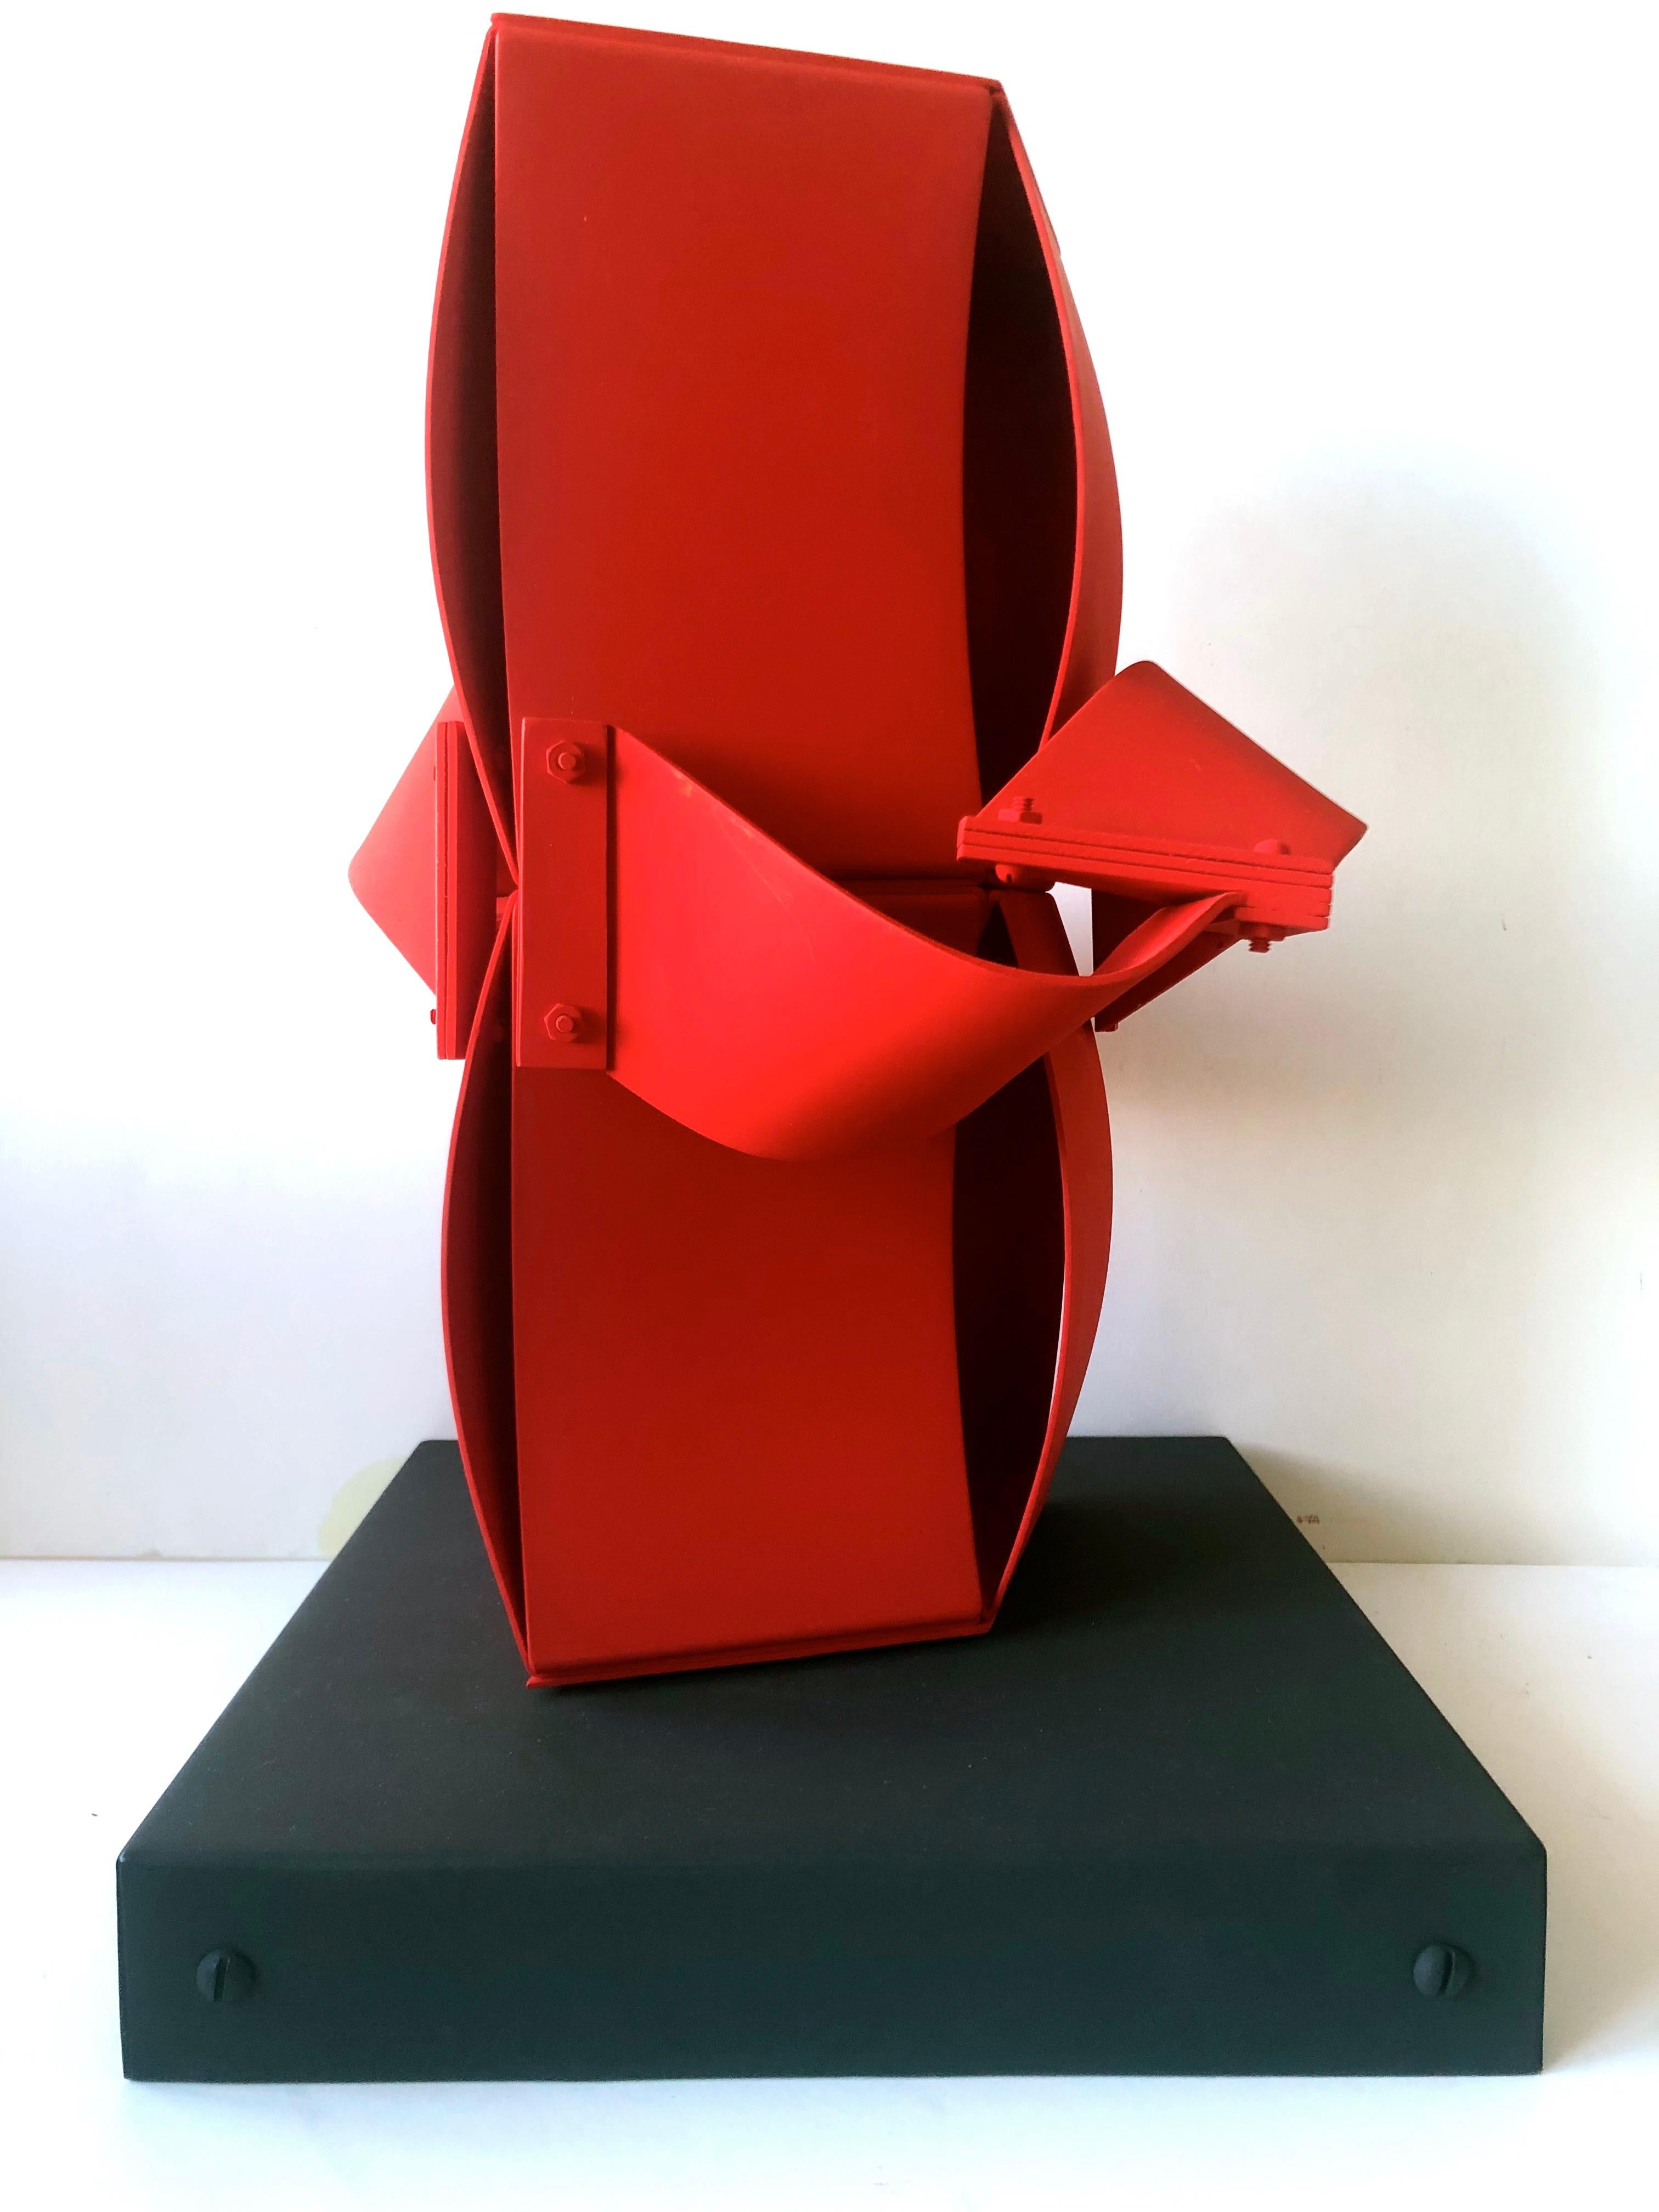 Deidad (Deity) edition 17/20, 1988, signed with certificate.

Edgard Negret studied at the School of Fine Arts in Cali between 1938 and 1943. The following year, he met in his hometown the Basque sculptor Jorge Oteiza, who introduced him to modern